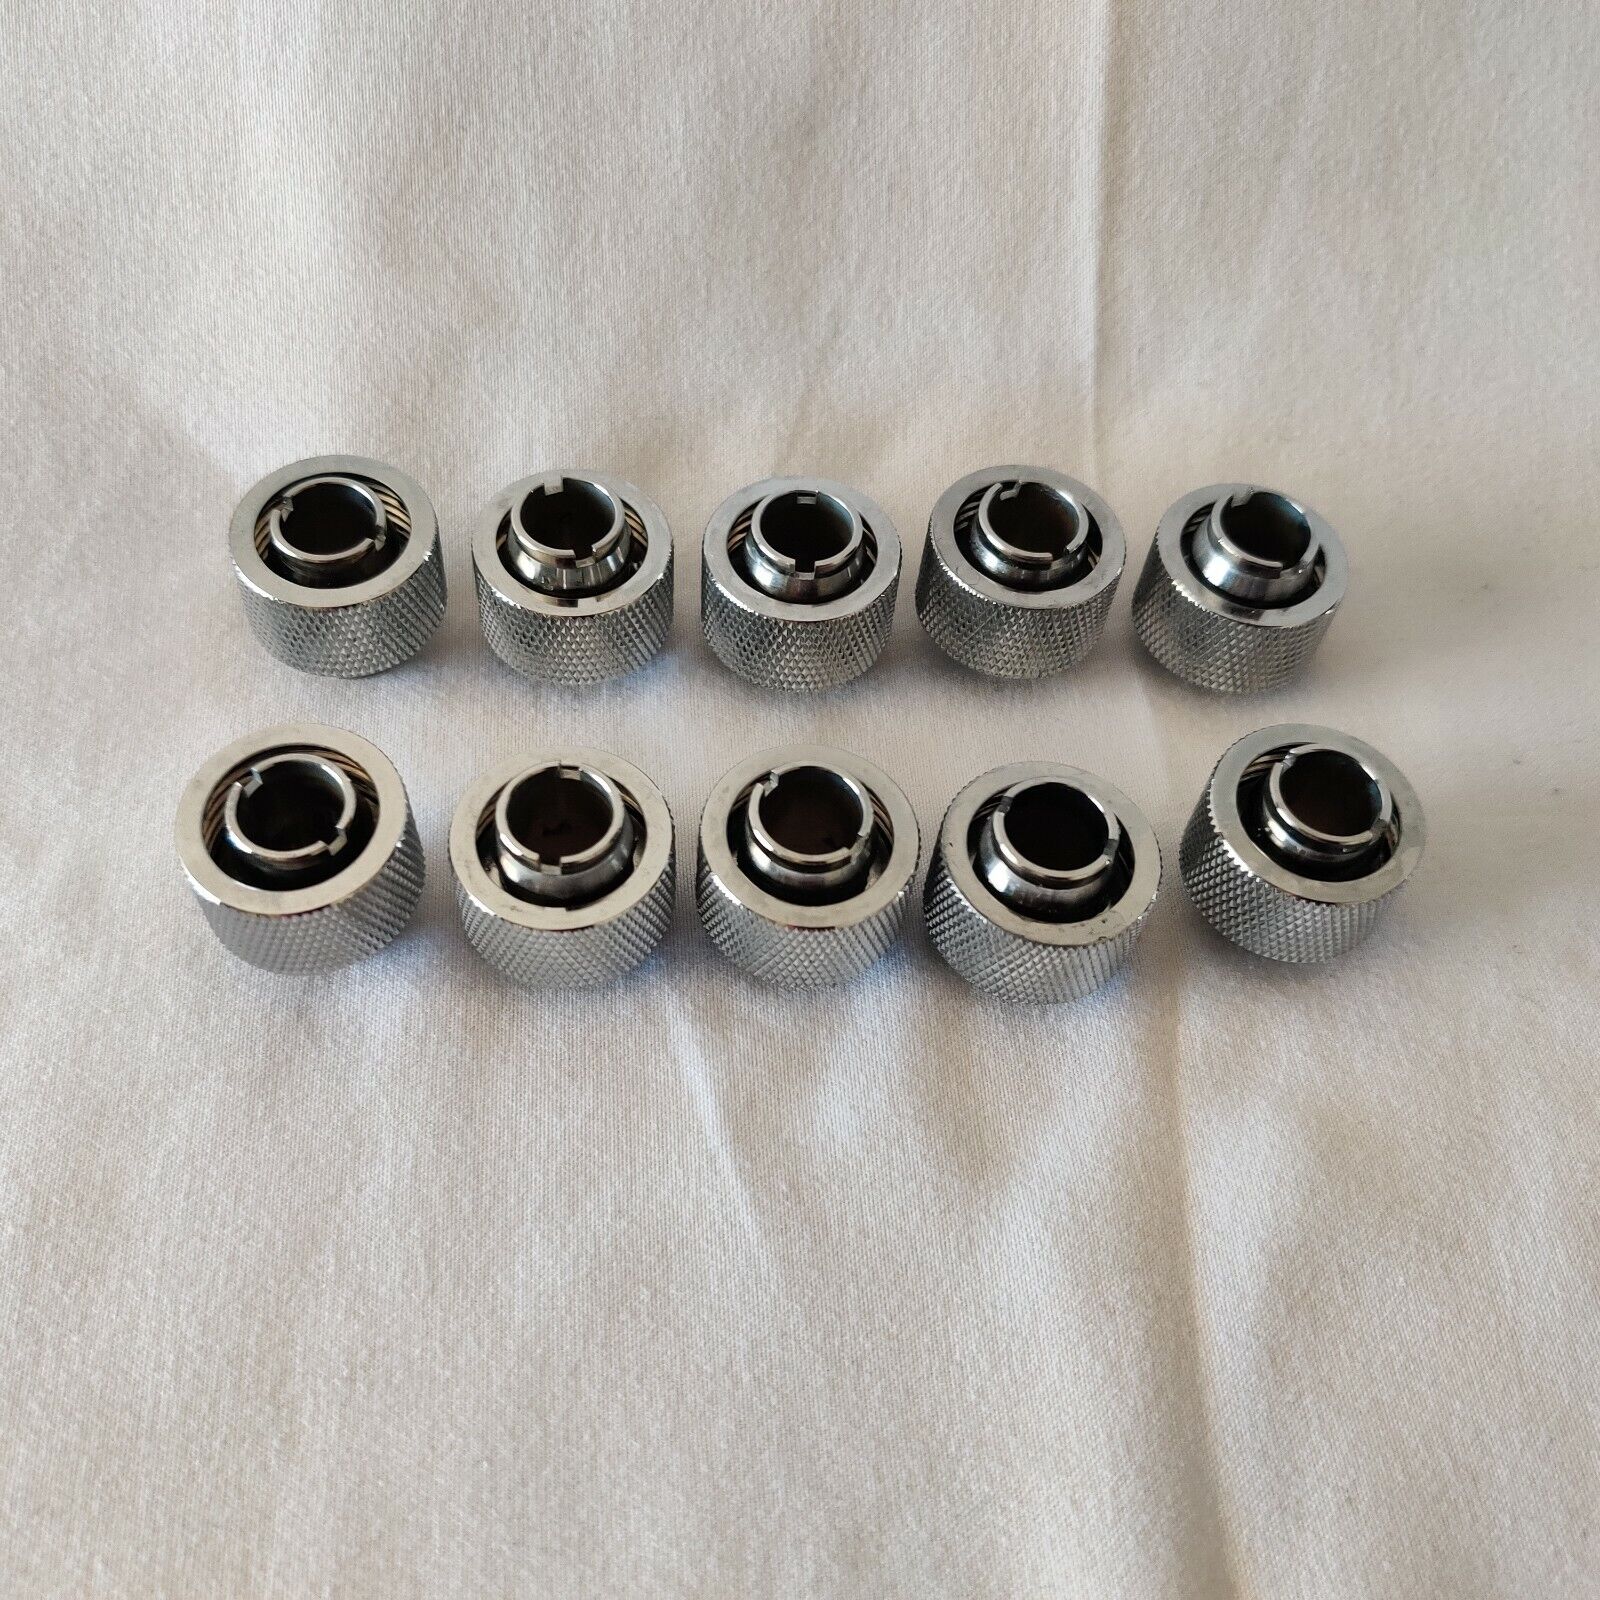 XSPC COIN FIT Compression Fittings V1 G1/4 to 7/16" ID 5/8" OD - Pack of 10